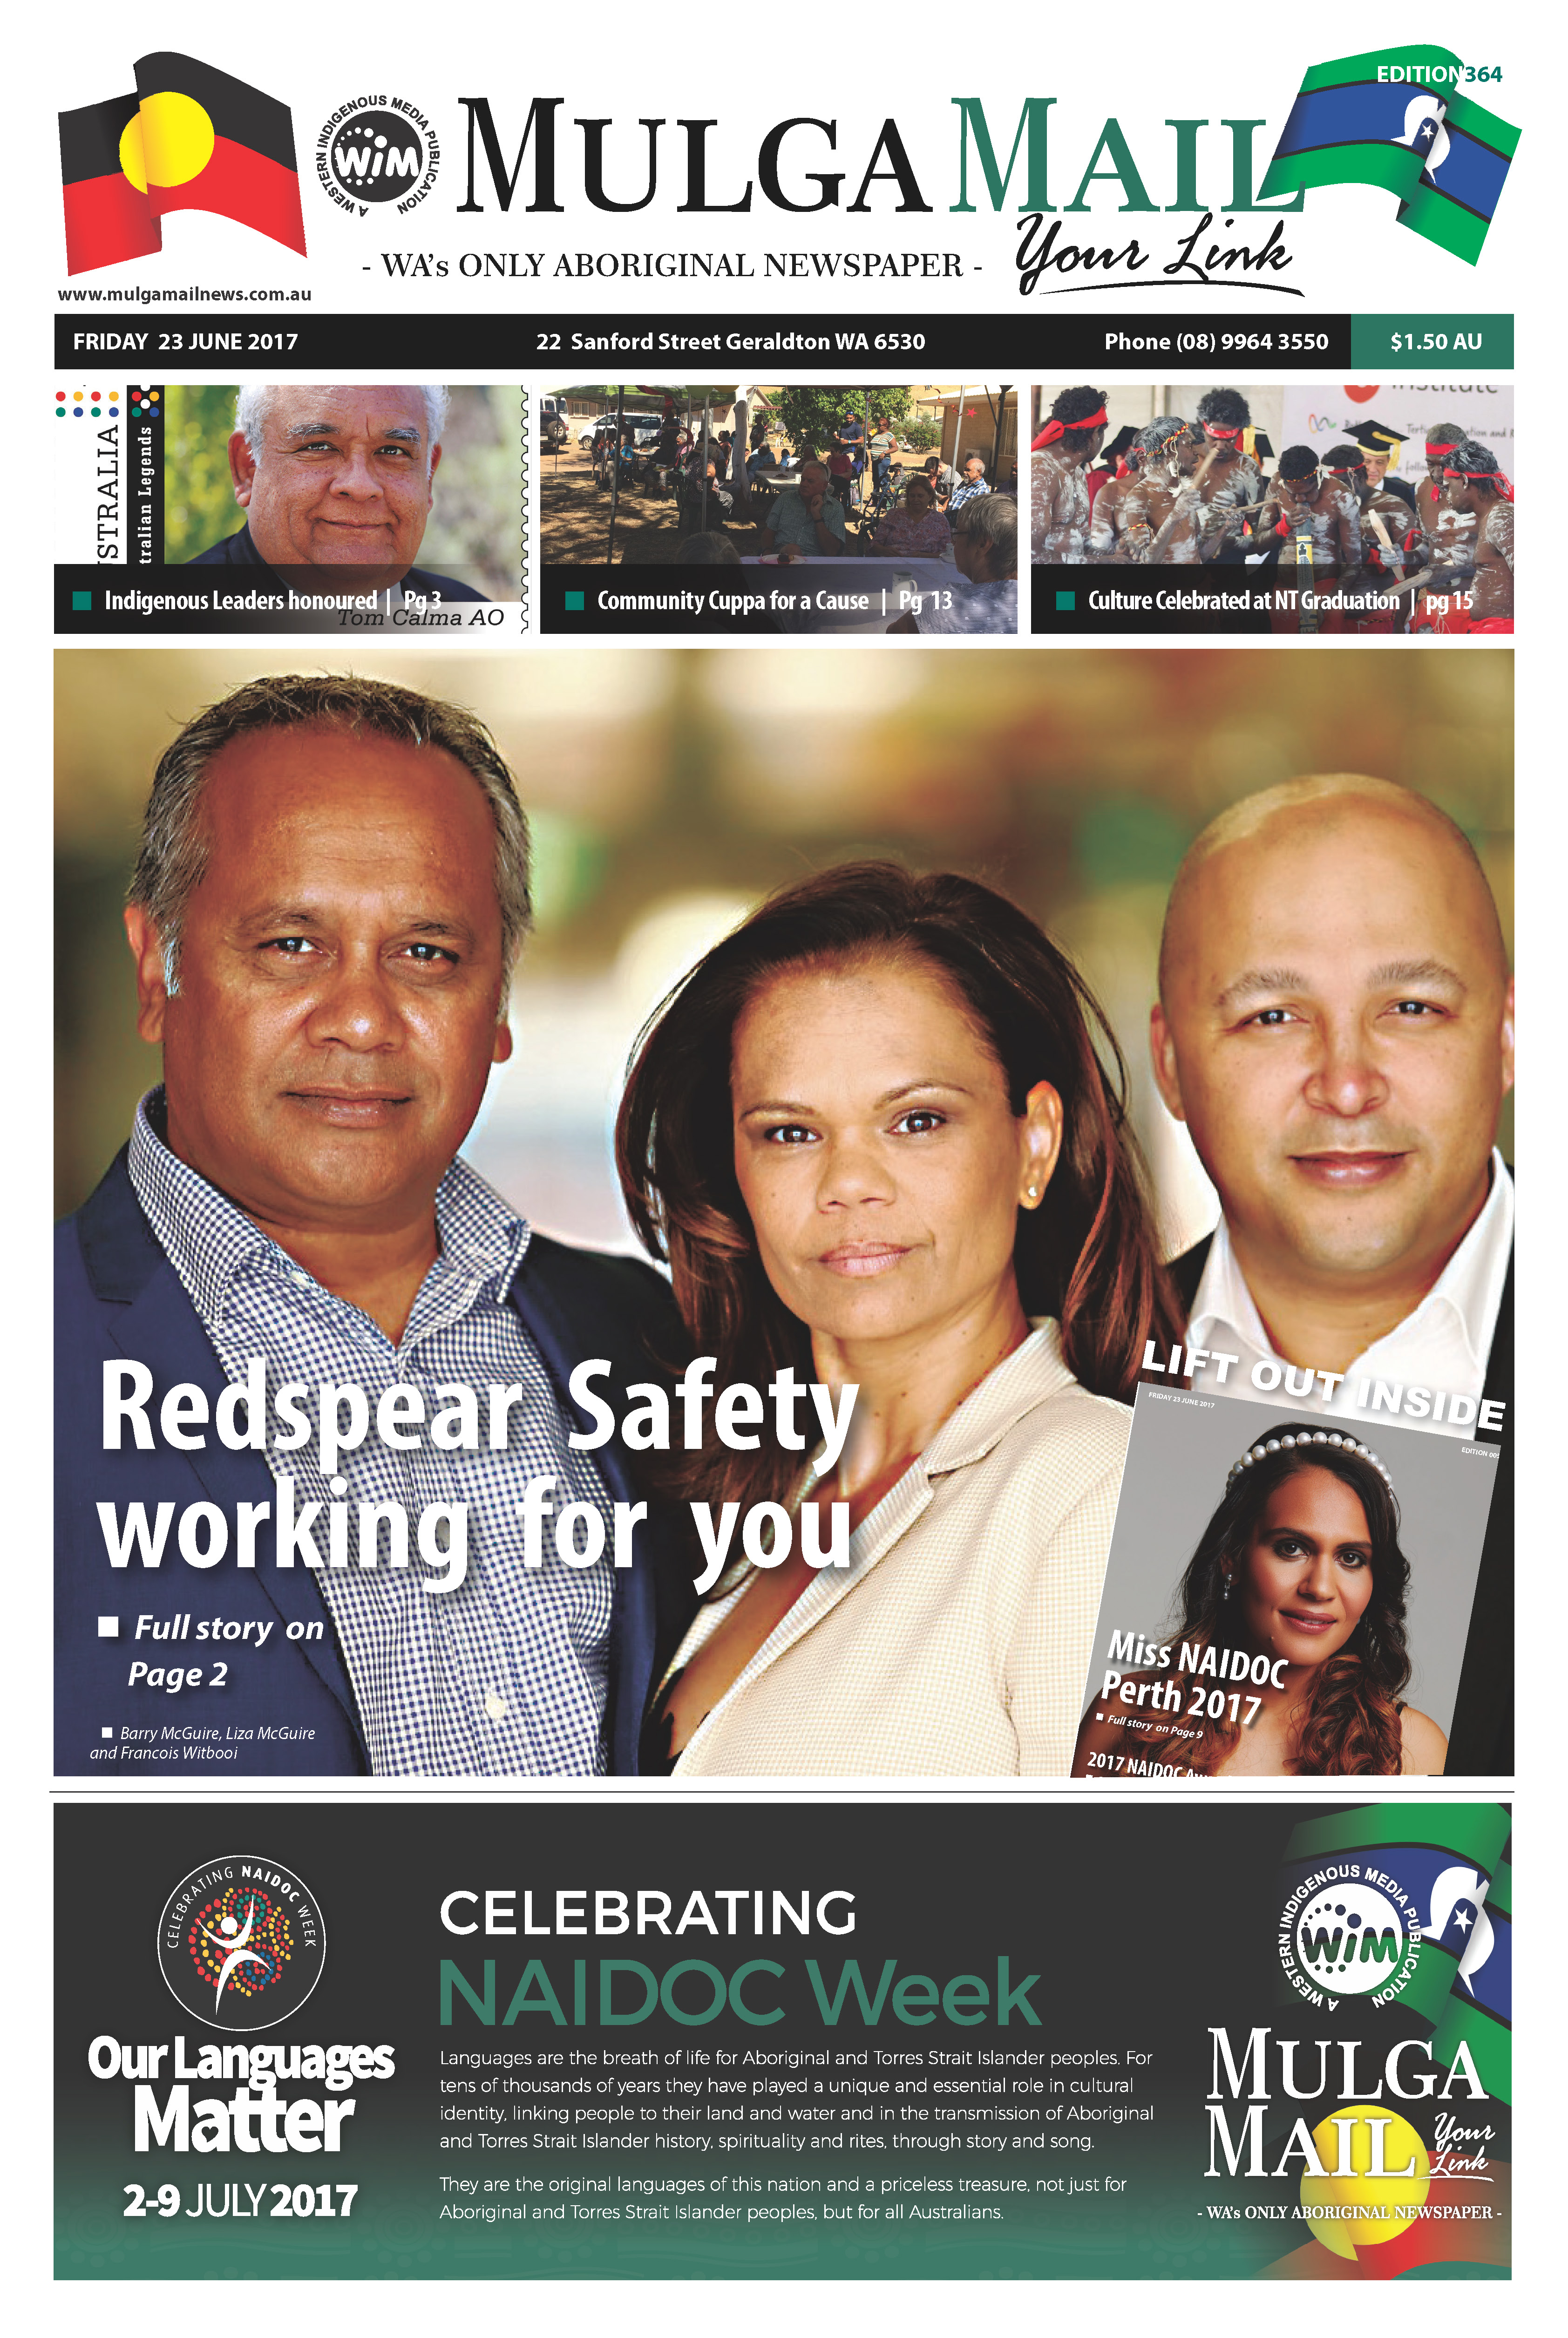 https://redspearsafety.com.au/wp-content/uploads/2017/11/COVER-PAGE-JUNE-2017.jpg